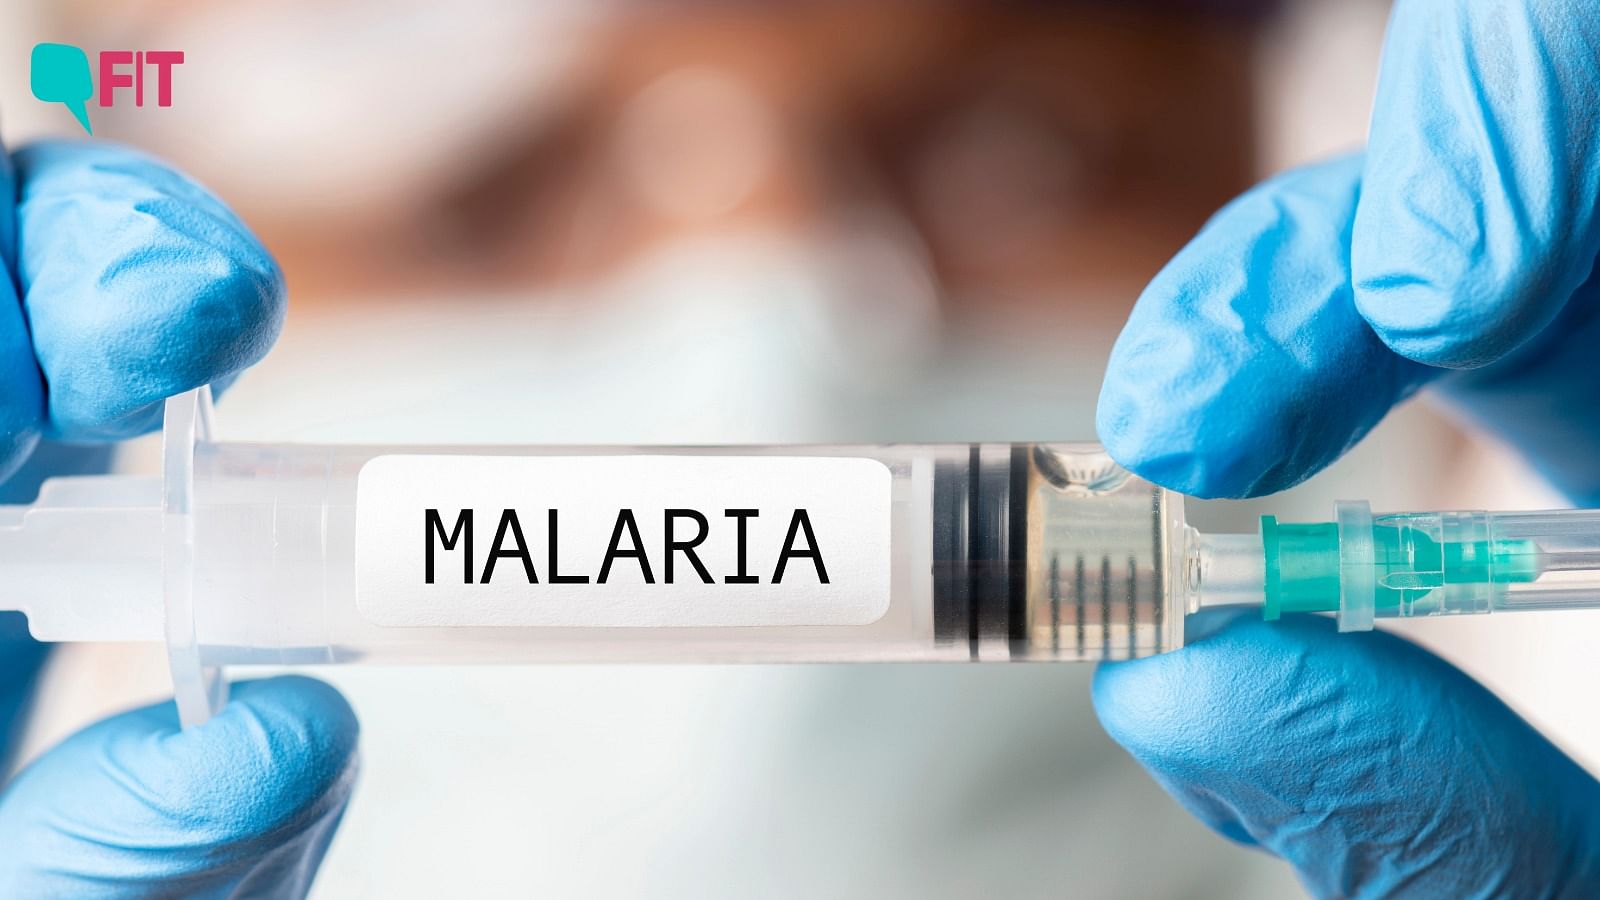 <div class="paragraphs"><p>The new R21 or Matrix M vaccine for <a href="https://www.thequint.com/fit/world-malaria-day-2022-types-of-malaria">malaria</a> is being called a 'game changer' by medical experts.</p></div>